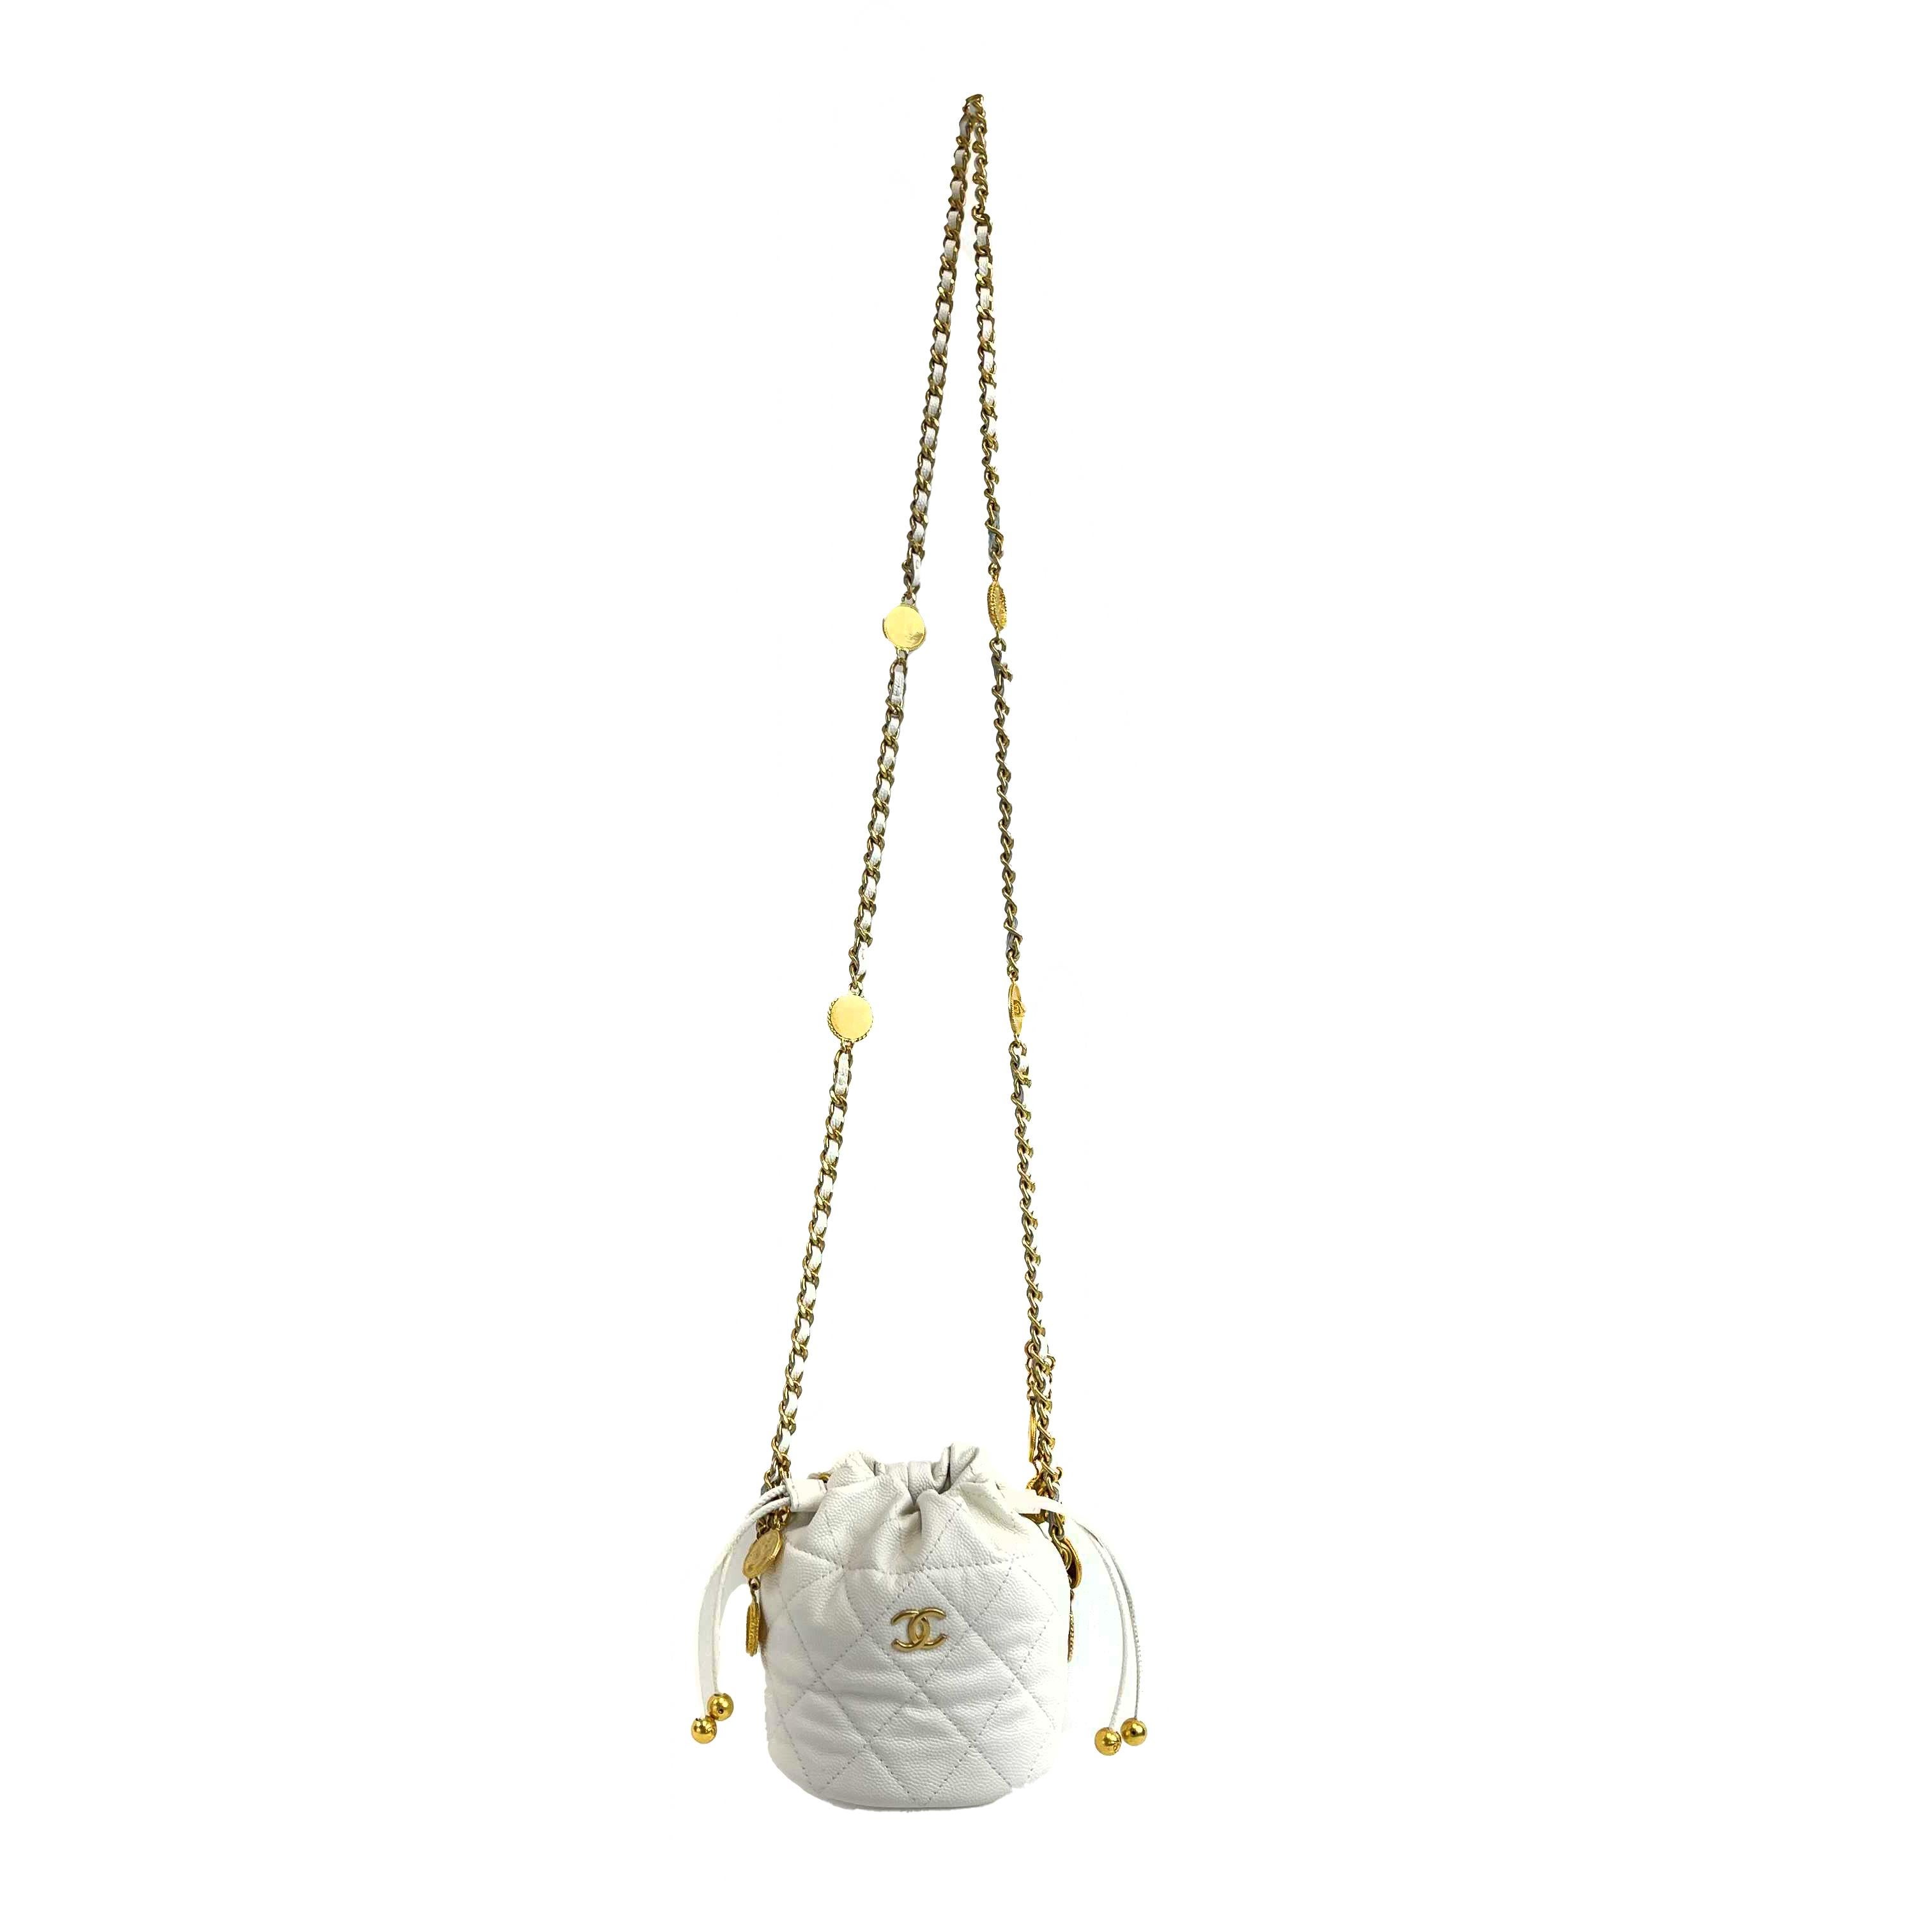 CHANEL - NEW Mini Bucket Bag - White Caviar Leather / Gold 10 Coins CC Crossbody For Sale 6